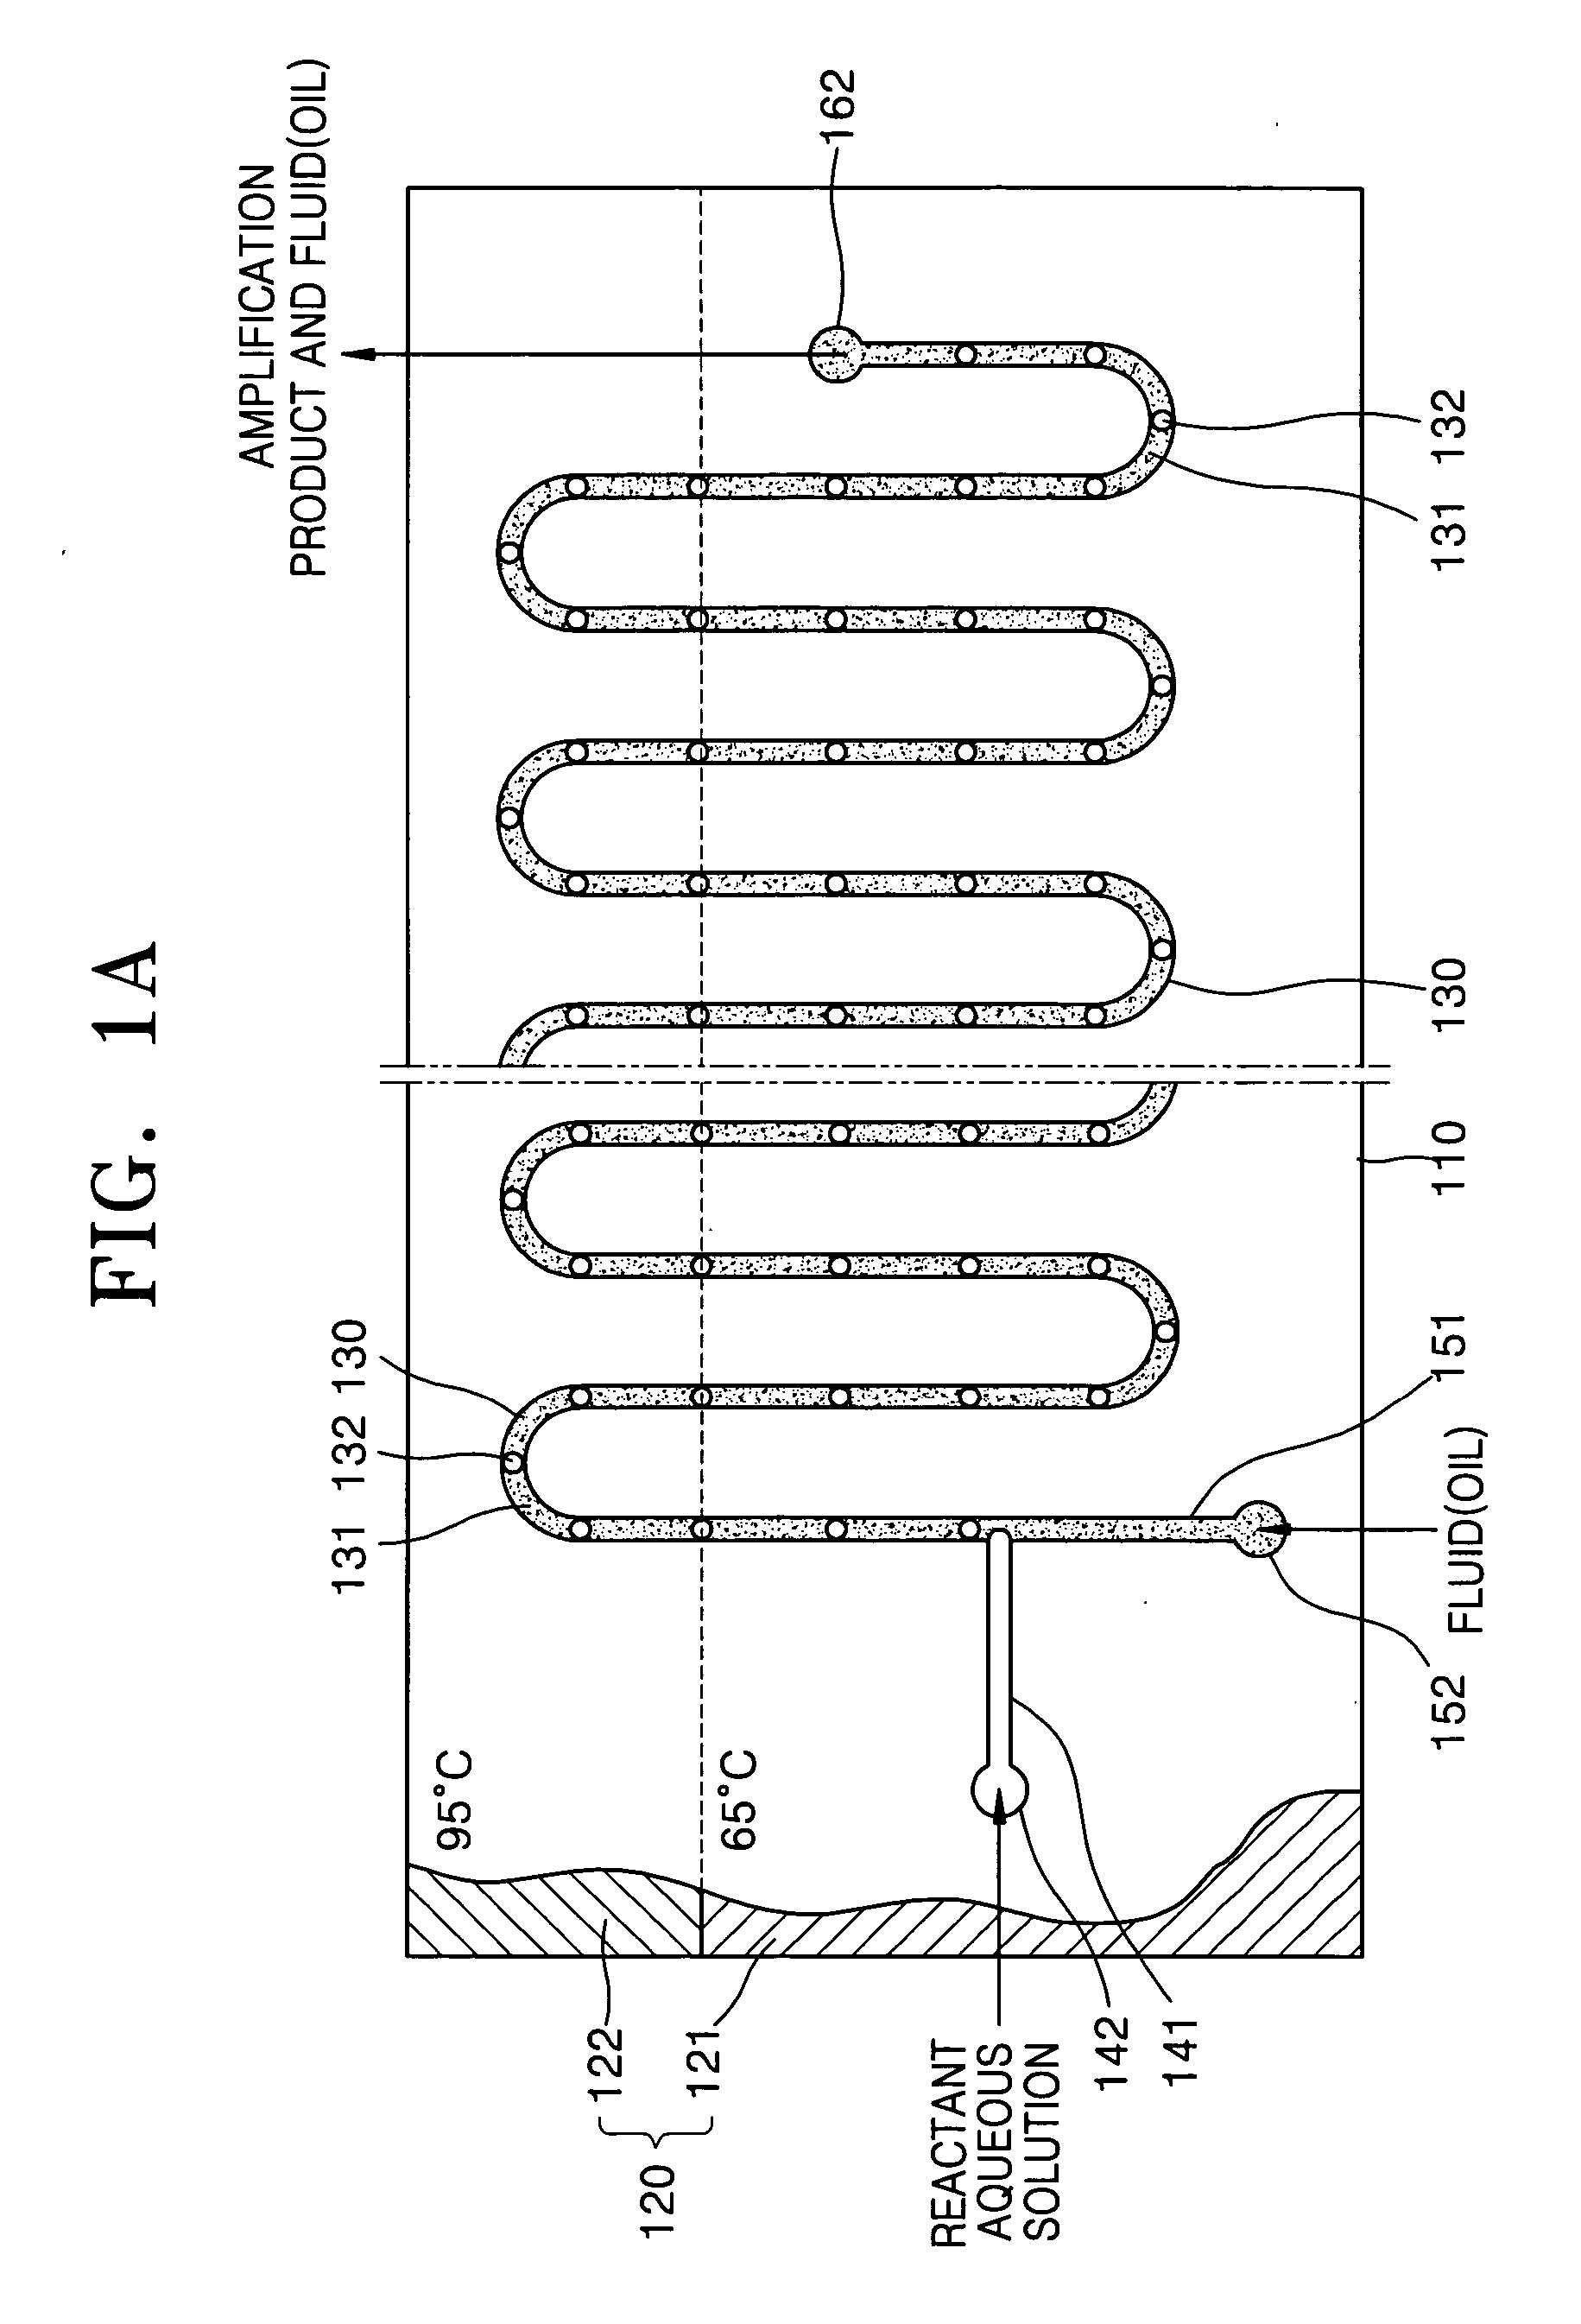 Method and apparatus for amplifying nucleic acids